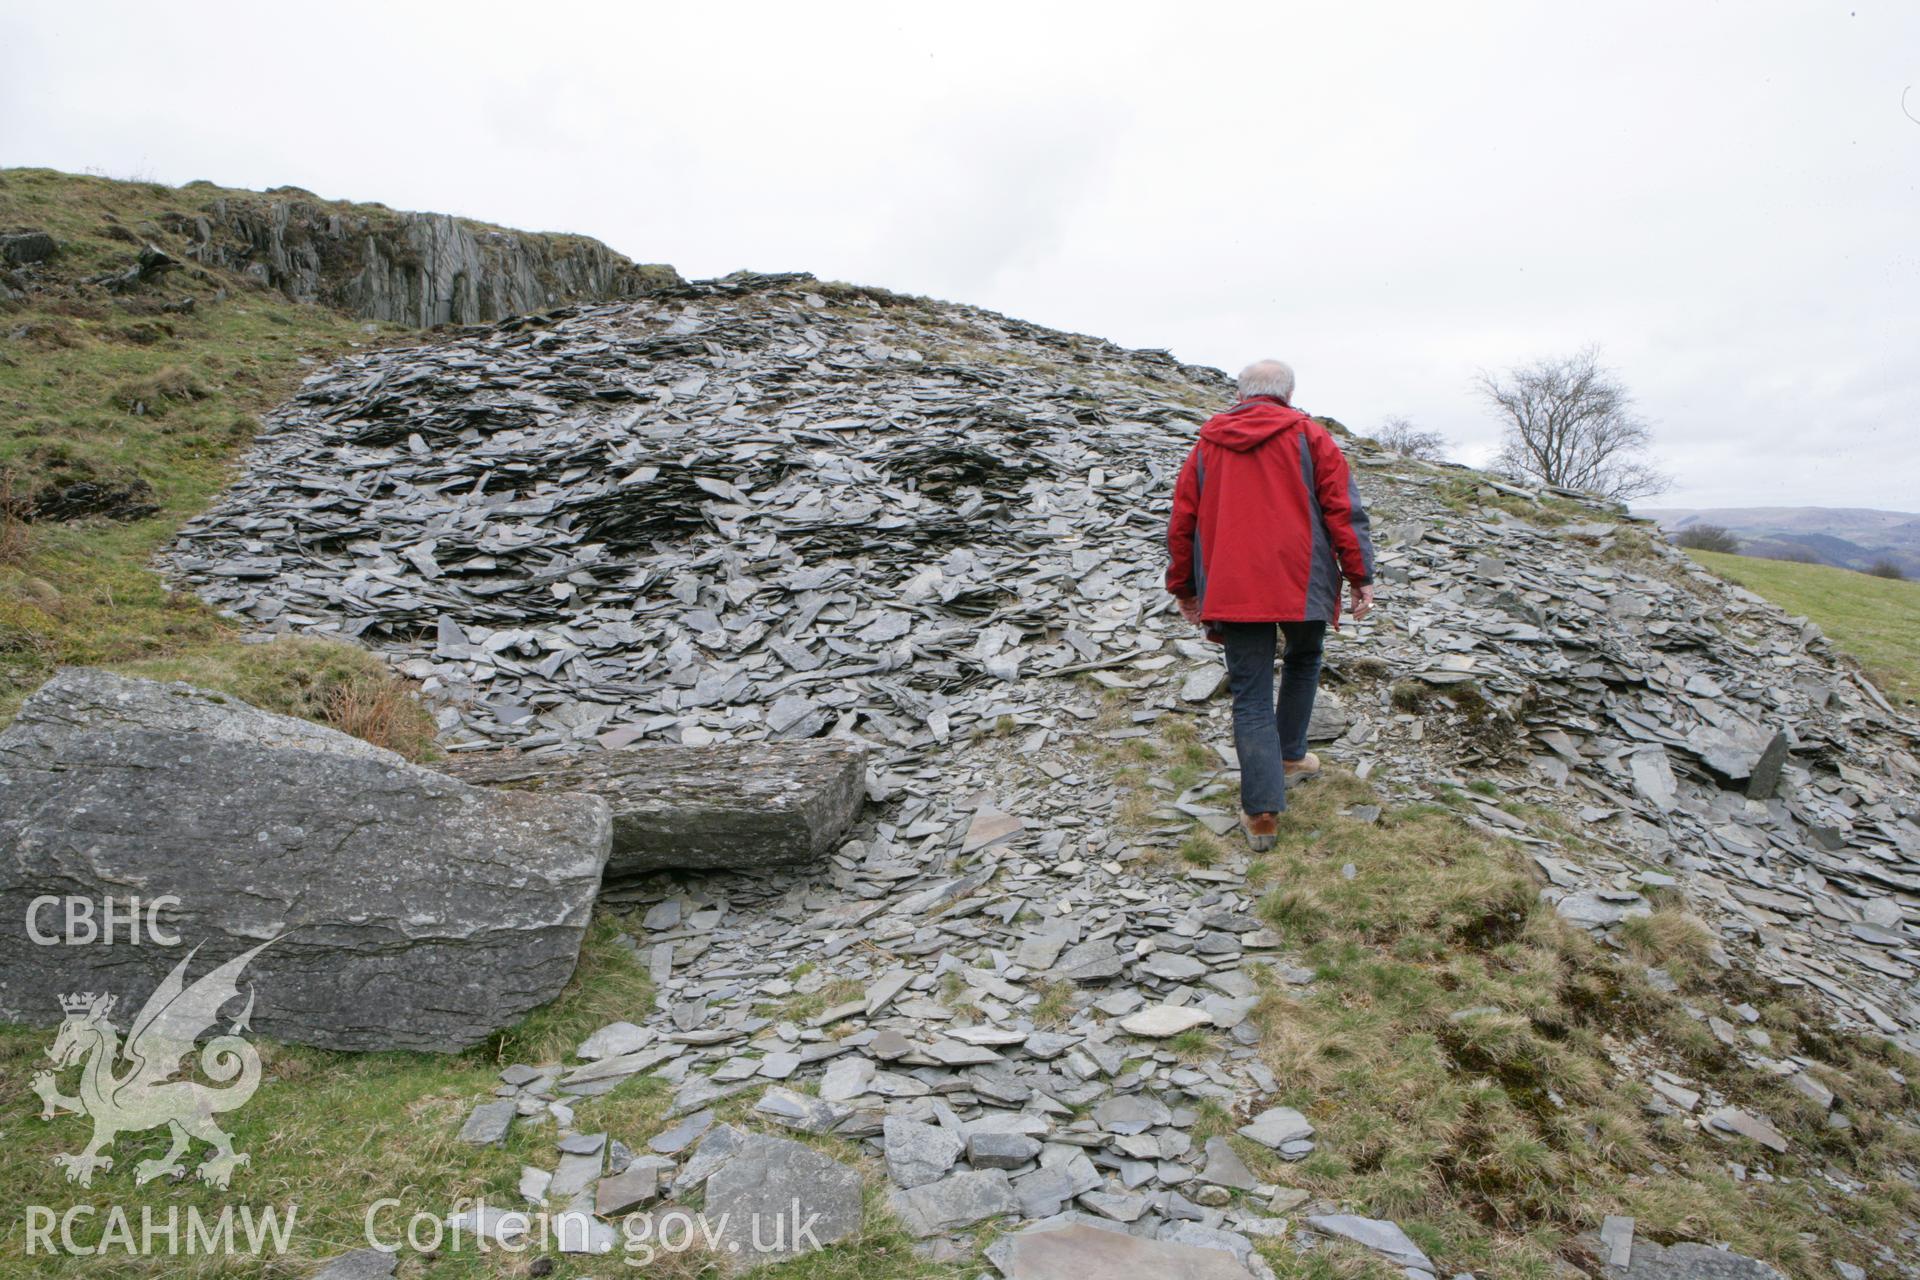 Historic quarry of shale slates at Geufron, Nant Bir, outcrops of which are thought to have provided at least some of the roofing slates for Abermagwr Roman villa. Field visit with Dr Jeffrey Davies, Dr Toby Driver & Chris Fletcher (geologist), 20/3/2012.